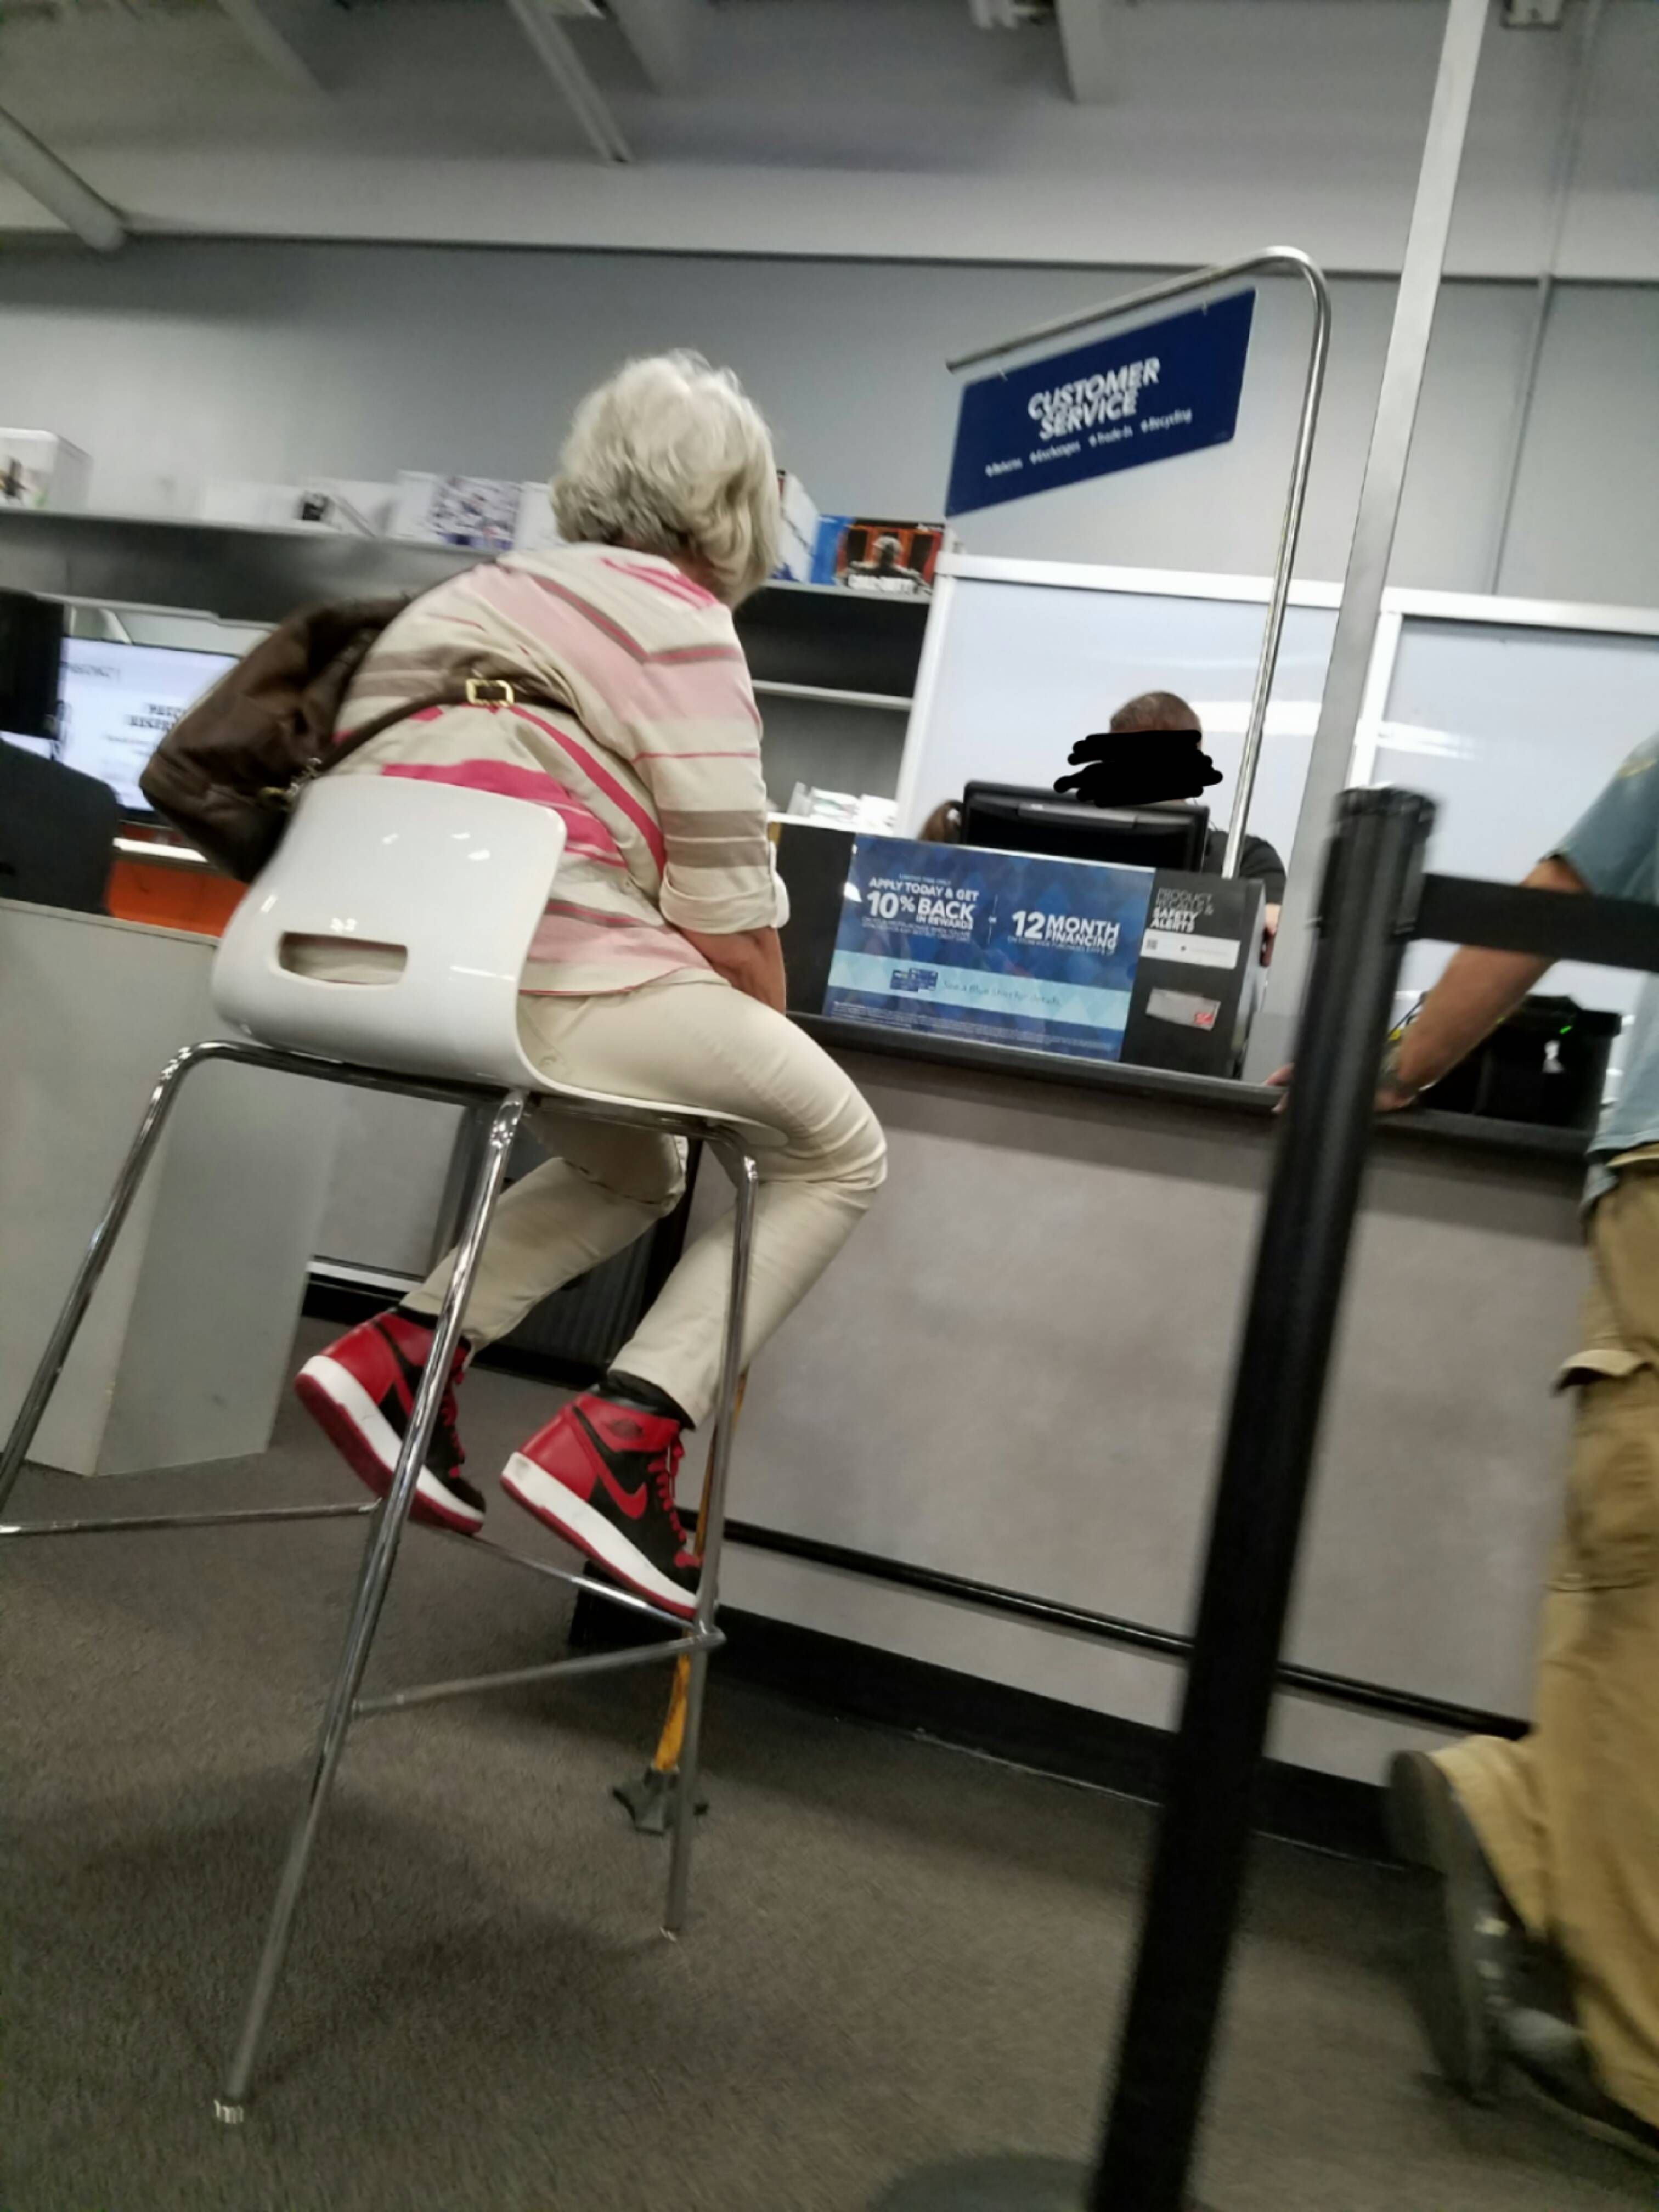 This old lady came into work, I'm still confused..